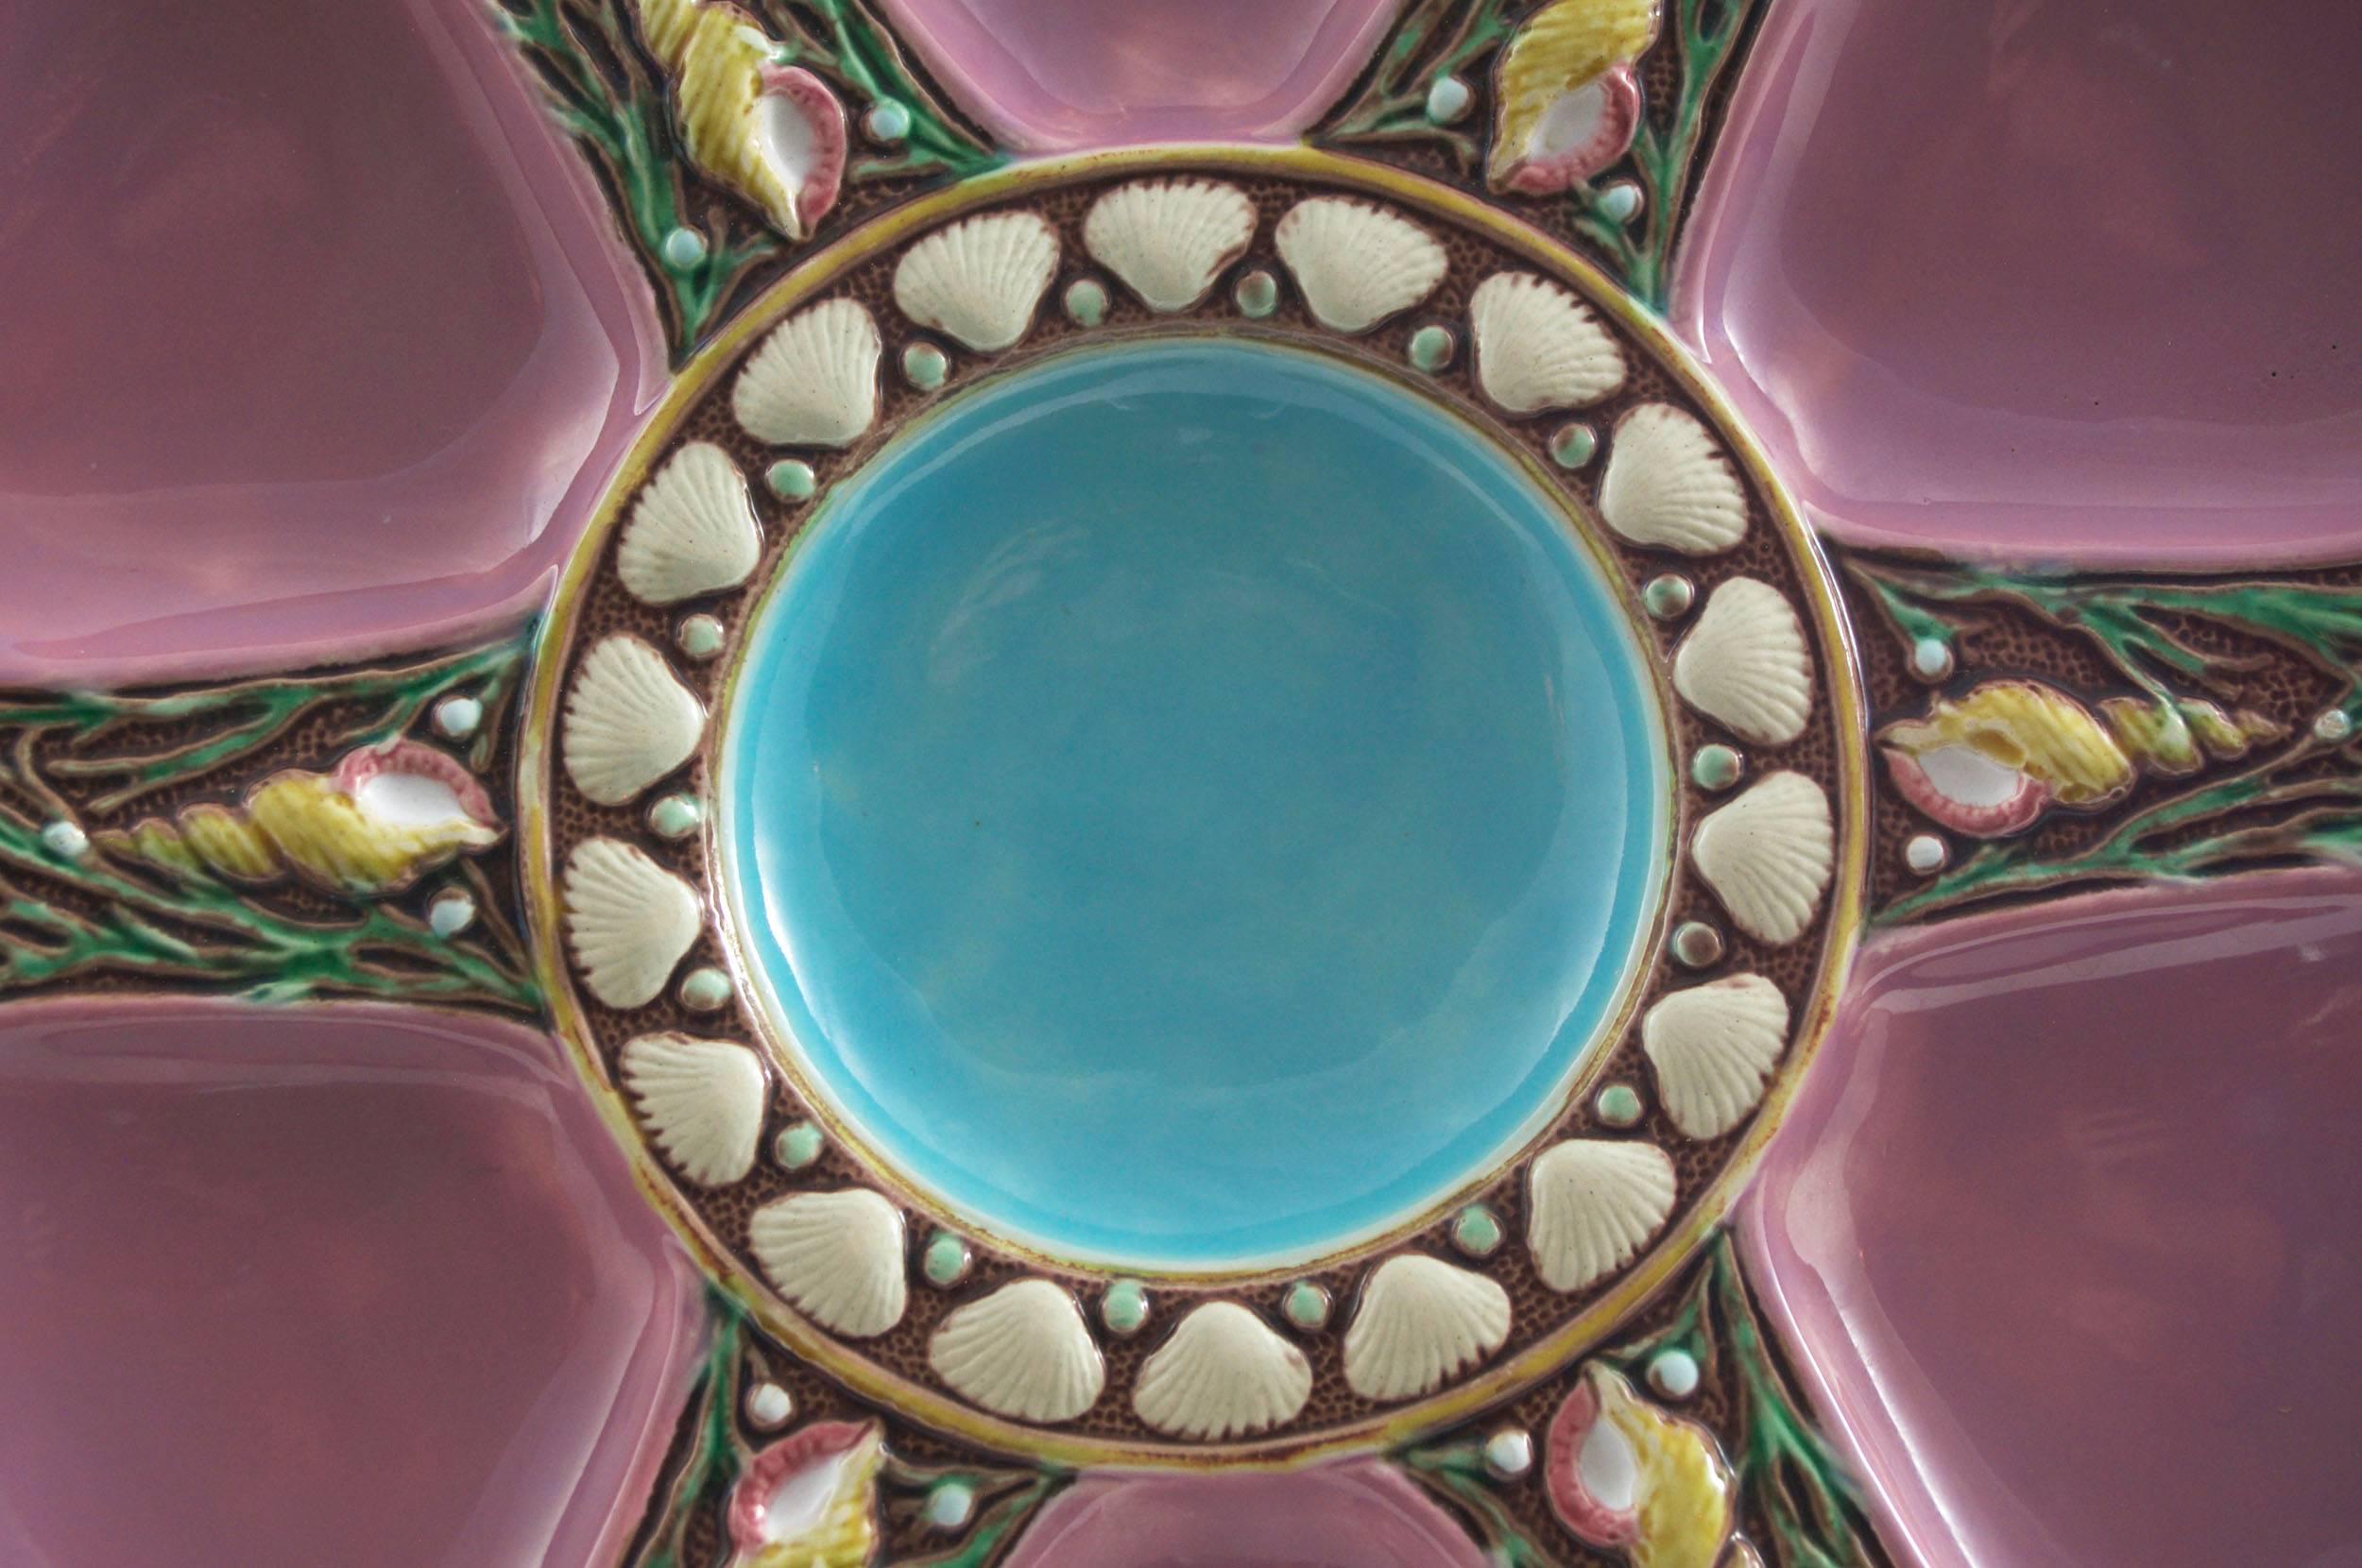 Minton Majolica oyster plate in pink; Six spokes and central well; Shell and seaweed ornamentation on each spoke; Impressed Minton; four available shape number 1323 with Minton date marks for 1873, 1874, and 1875.
For over 28 years we have been